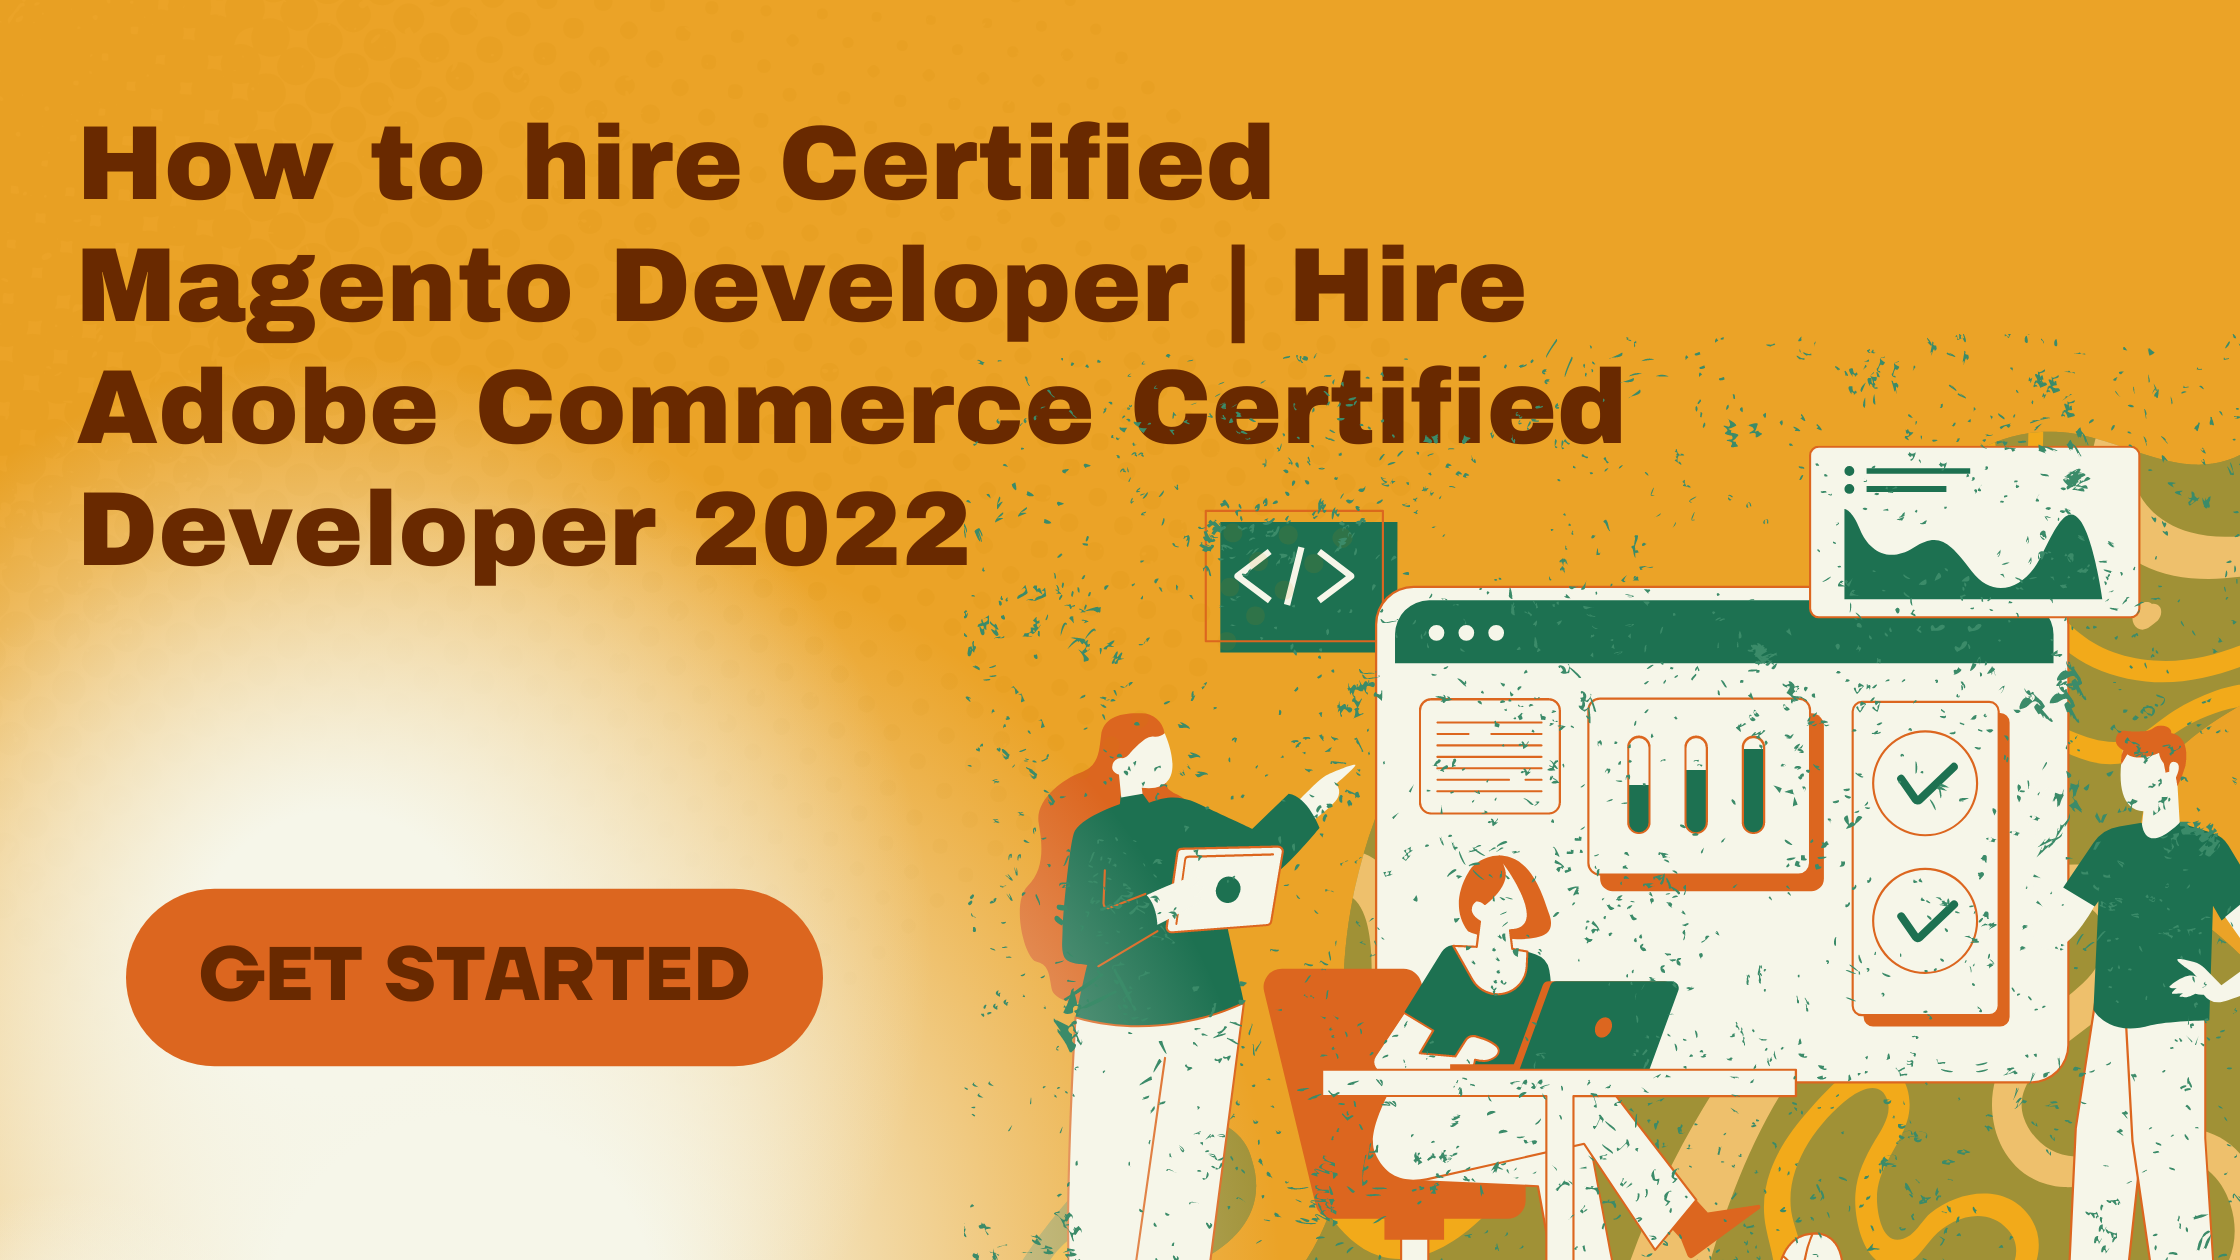 How to hire Certified Magento Developer | Hire Adobe Commerce Certified Developer 2022